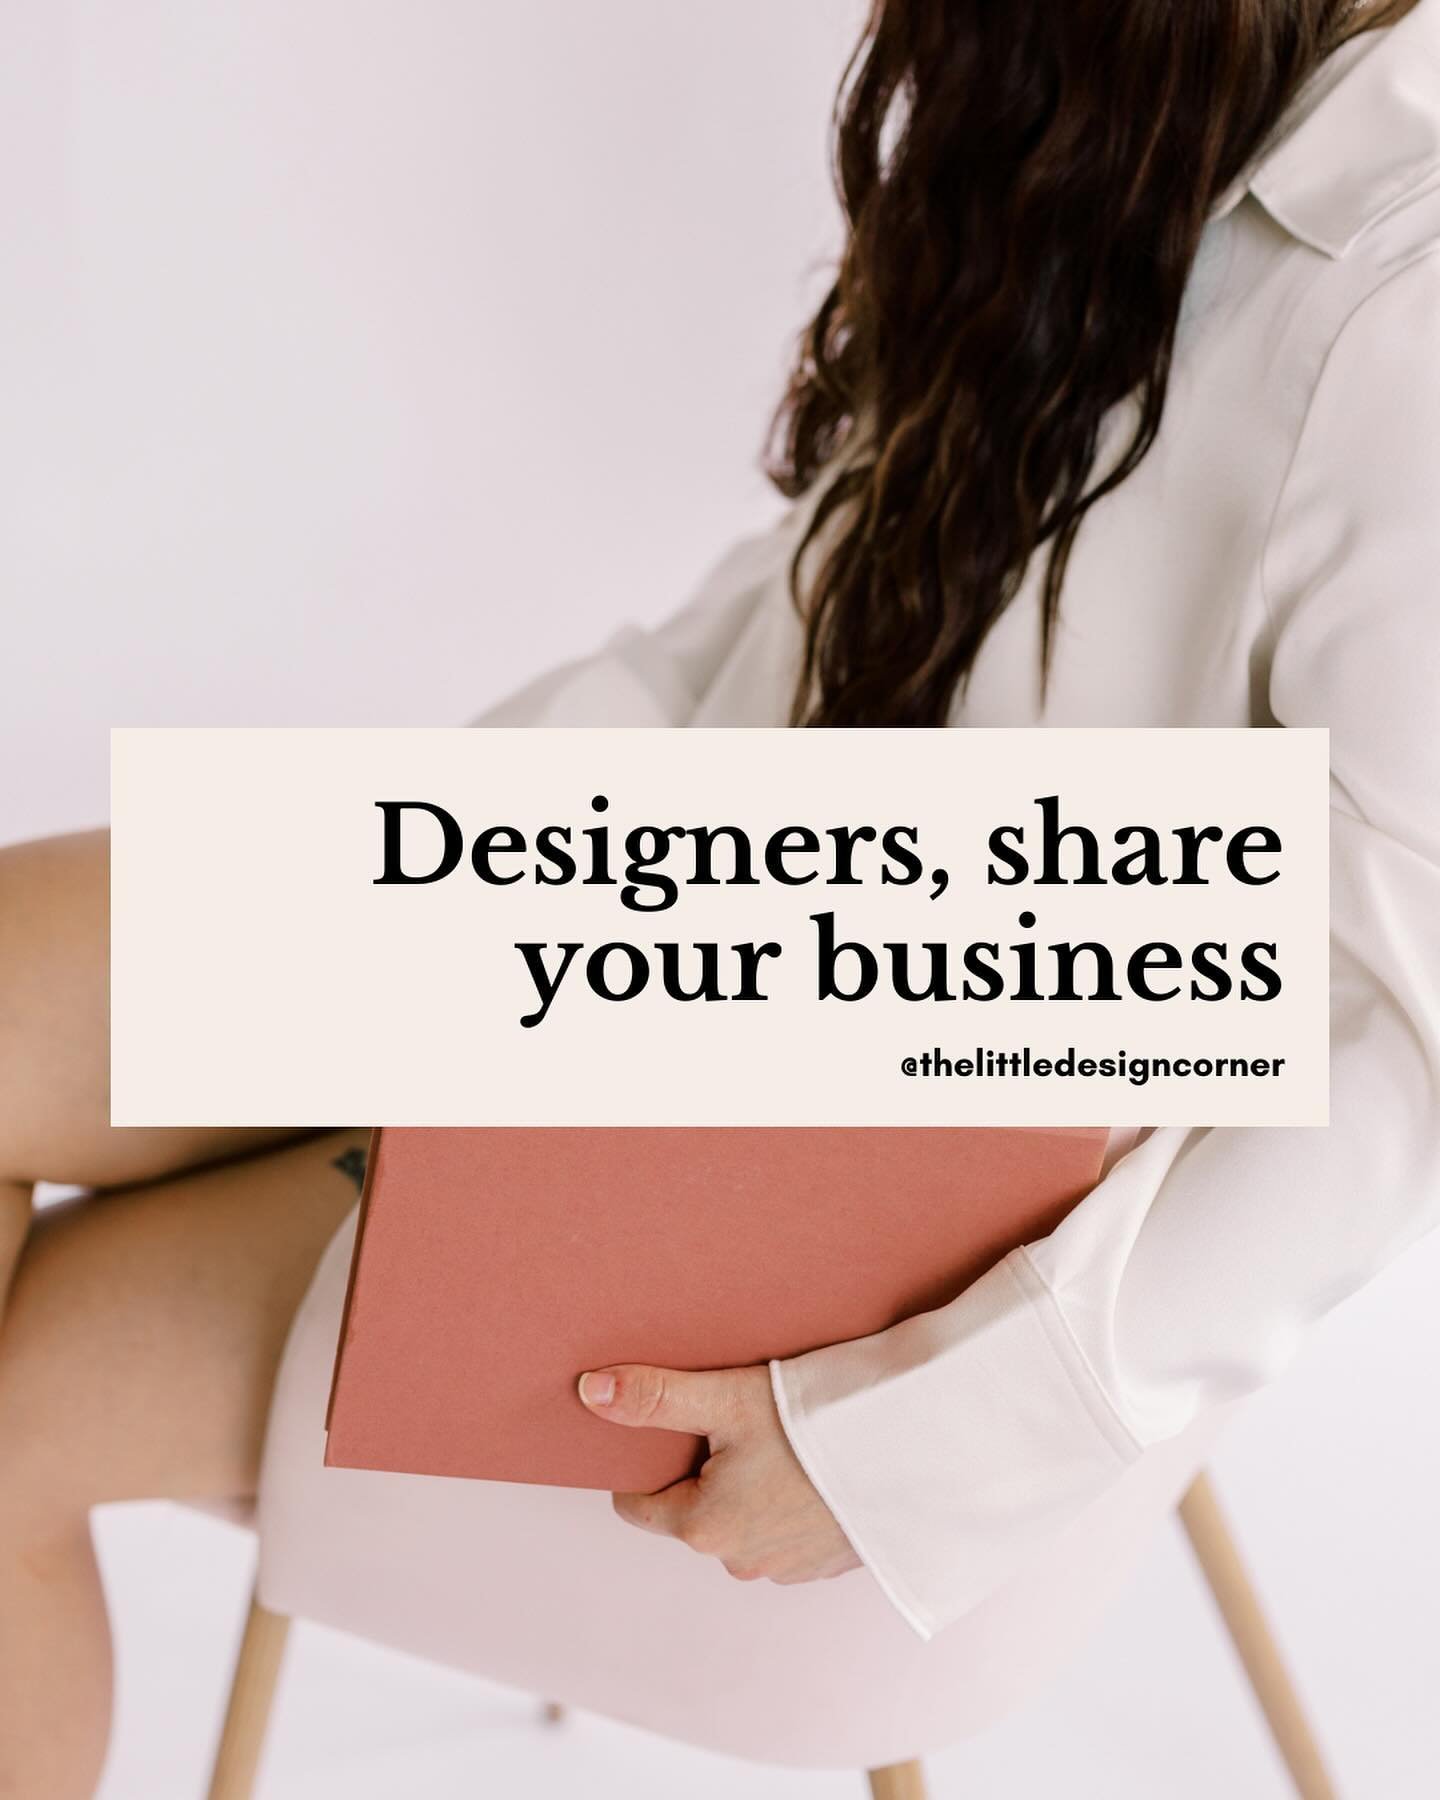 This post is for you to advertise your businesses to more than 164,000 others and get some new followers ⭐⬇️

✅ HERE&rsquo;S WHAT TO DO:⁠

🤩 Comment below with your Instagram handle - e.g. @thelittldesigncorner

🤩 Support your fellow design colleag